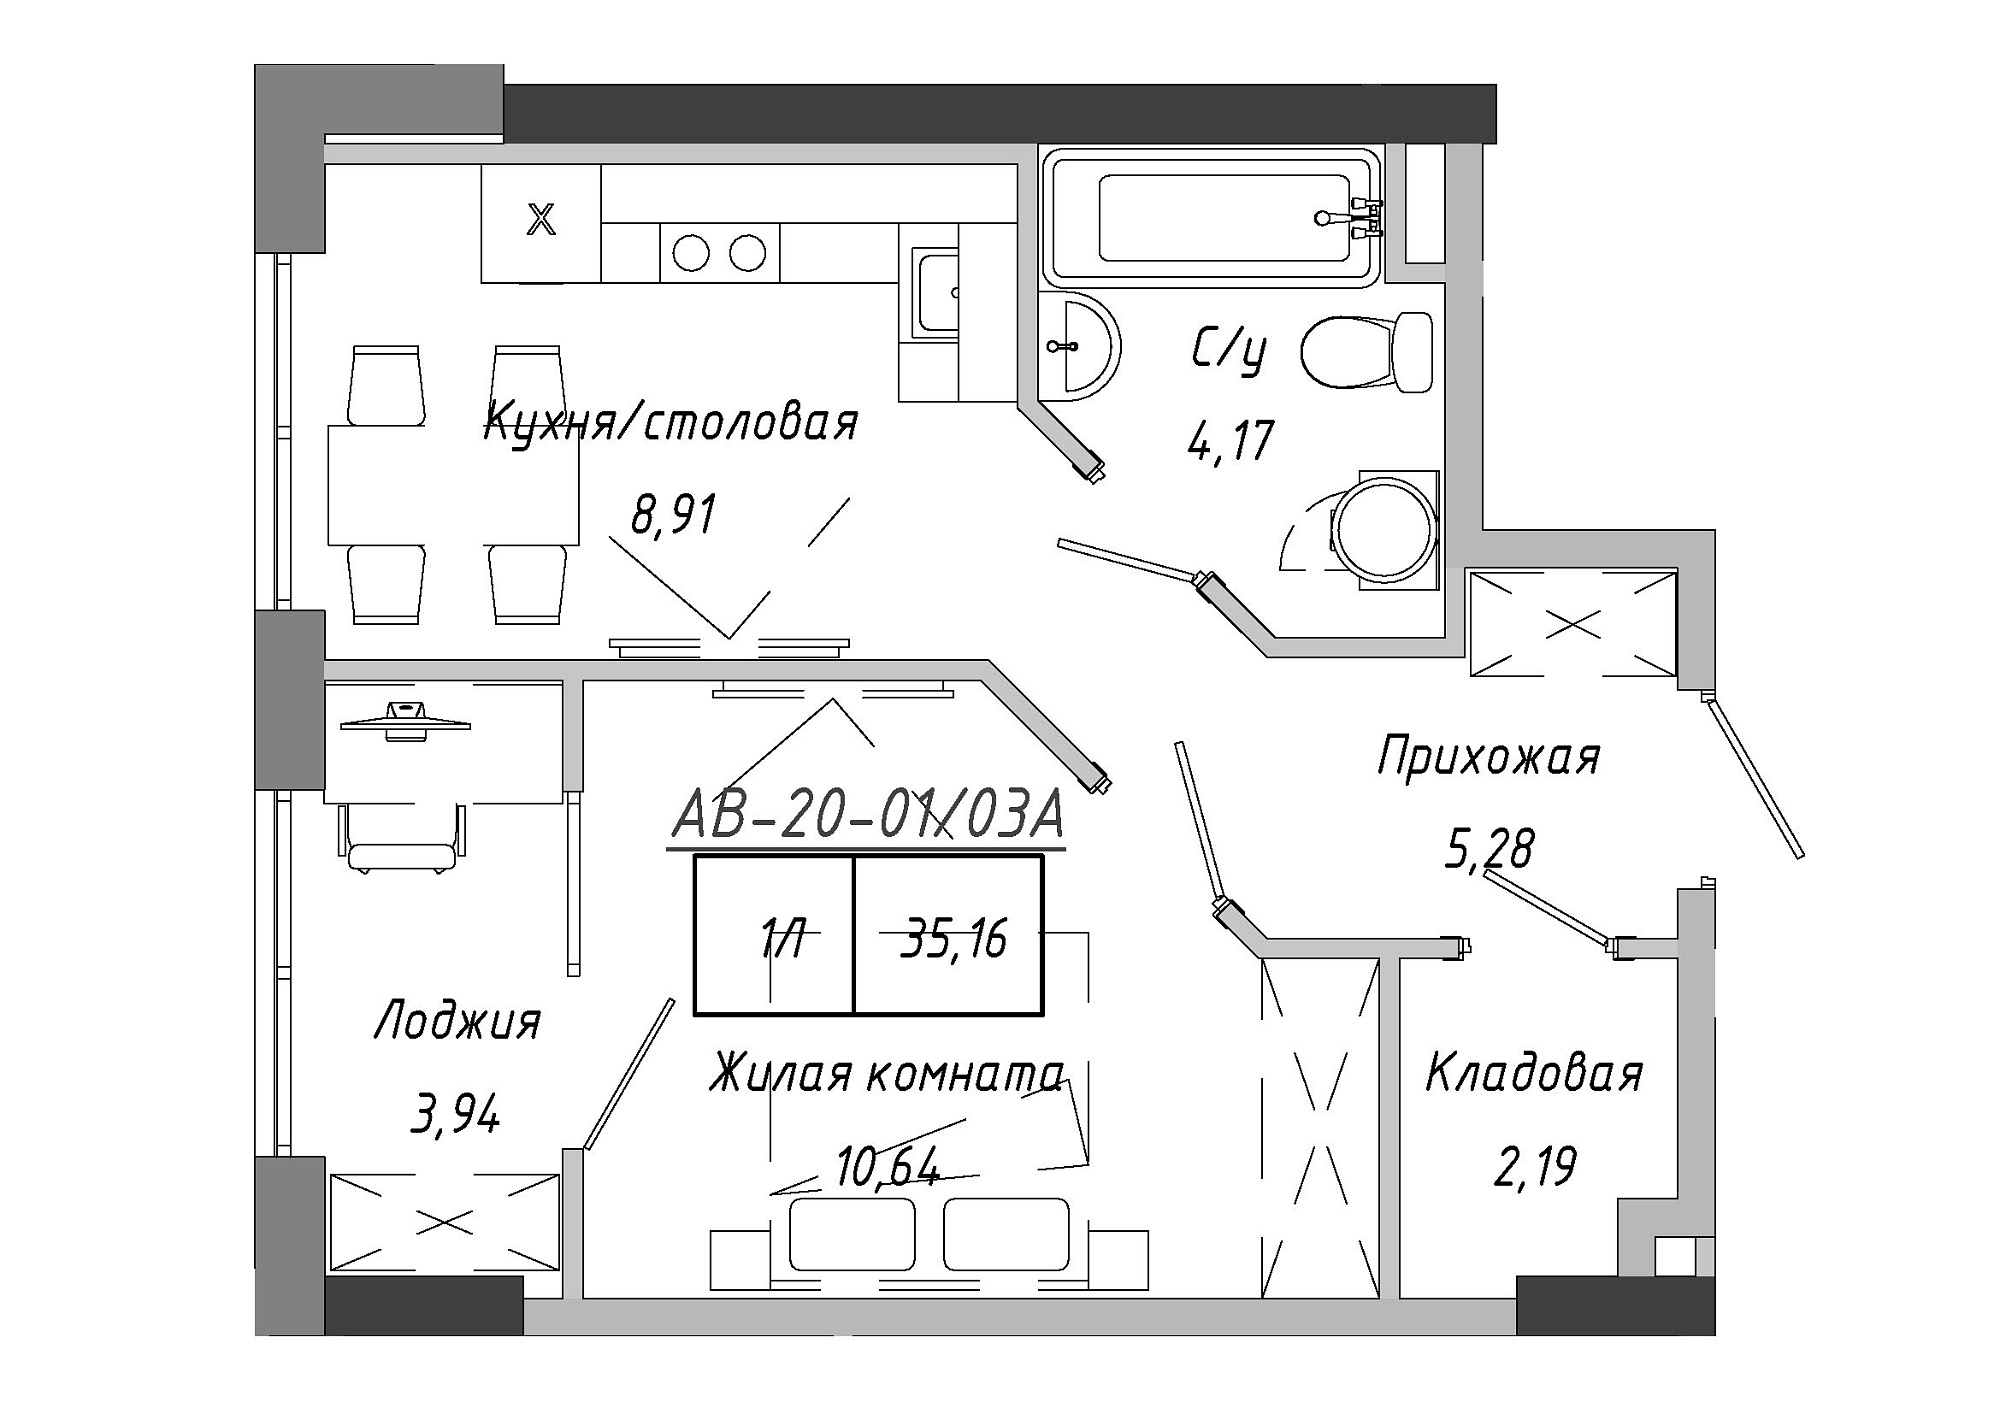 Planning 1-rm flats area 35.16m2, AB-20-01/0003а.